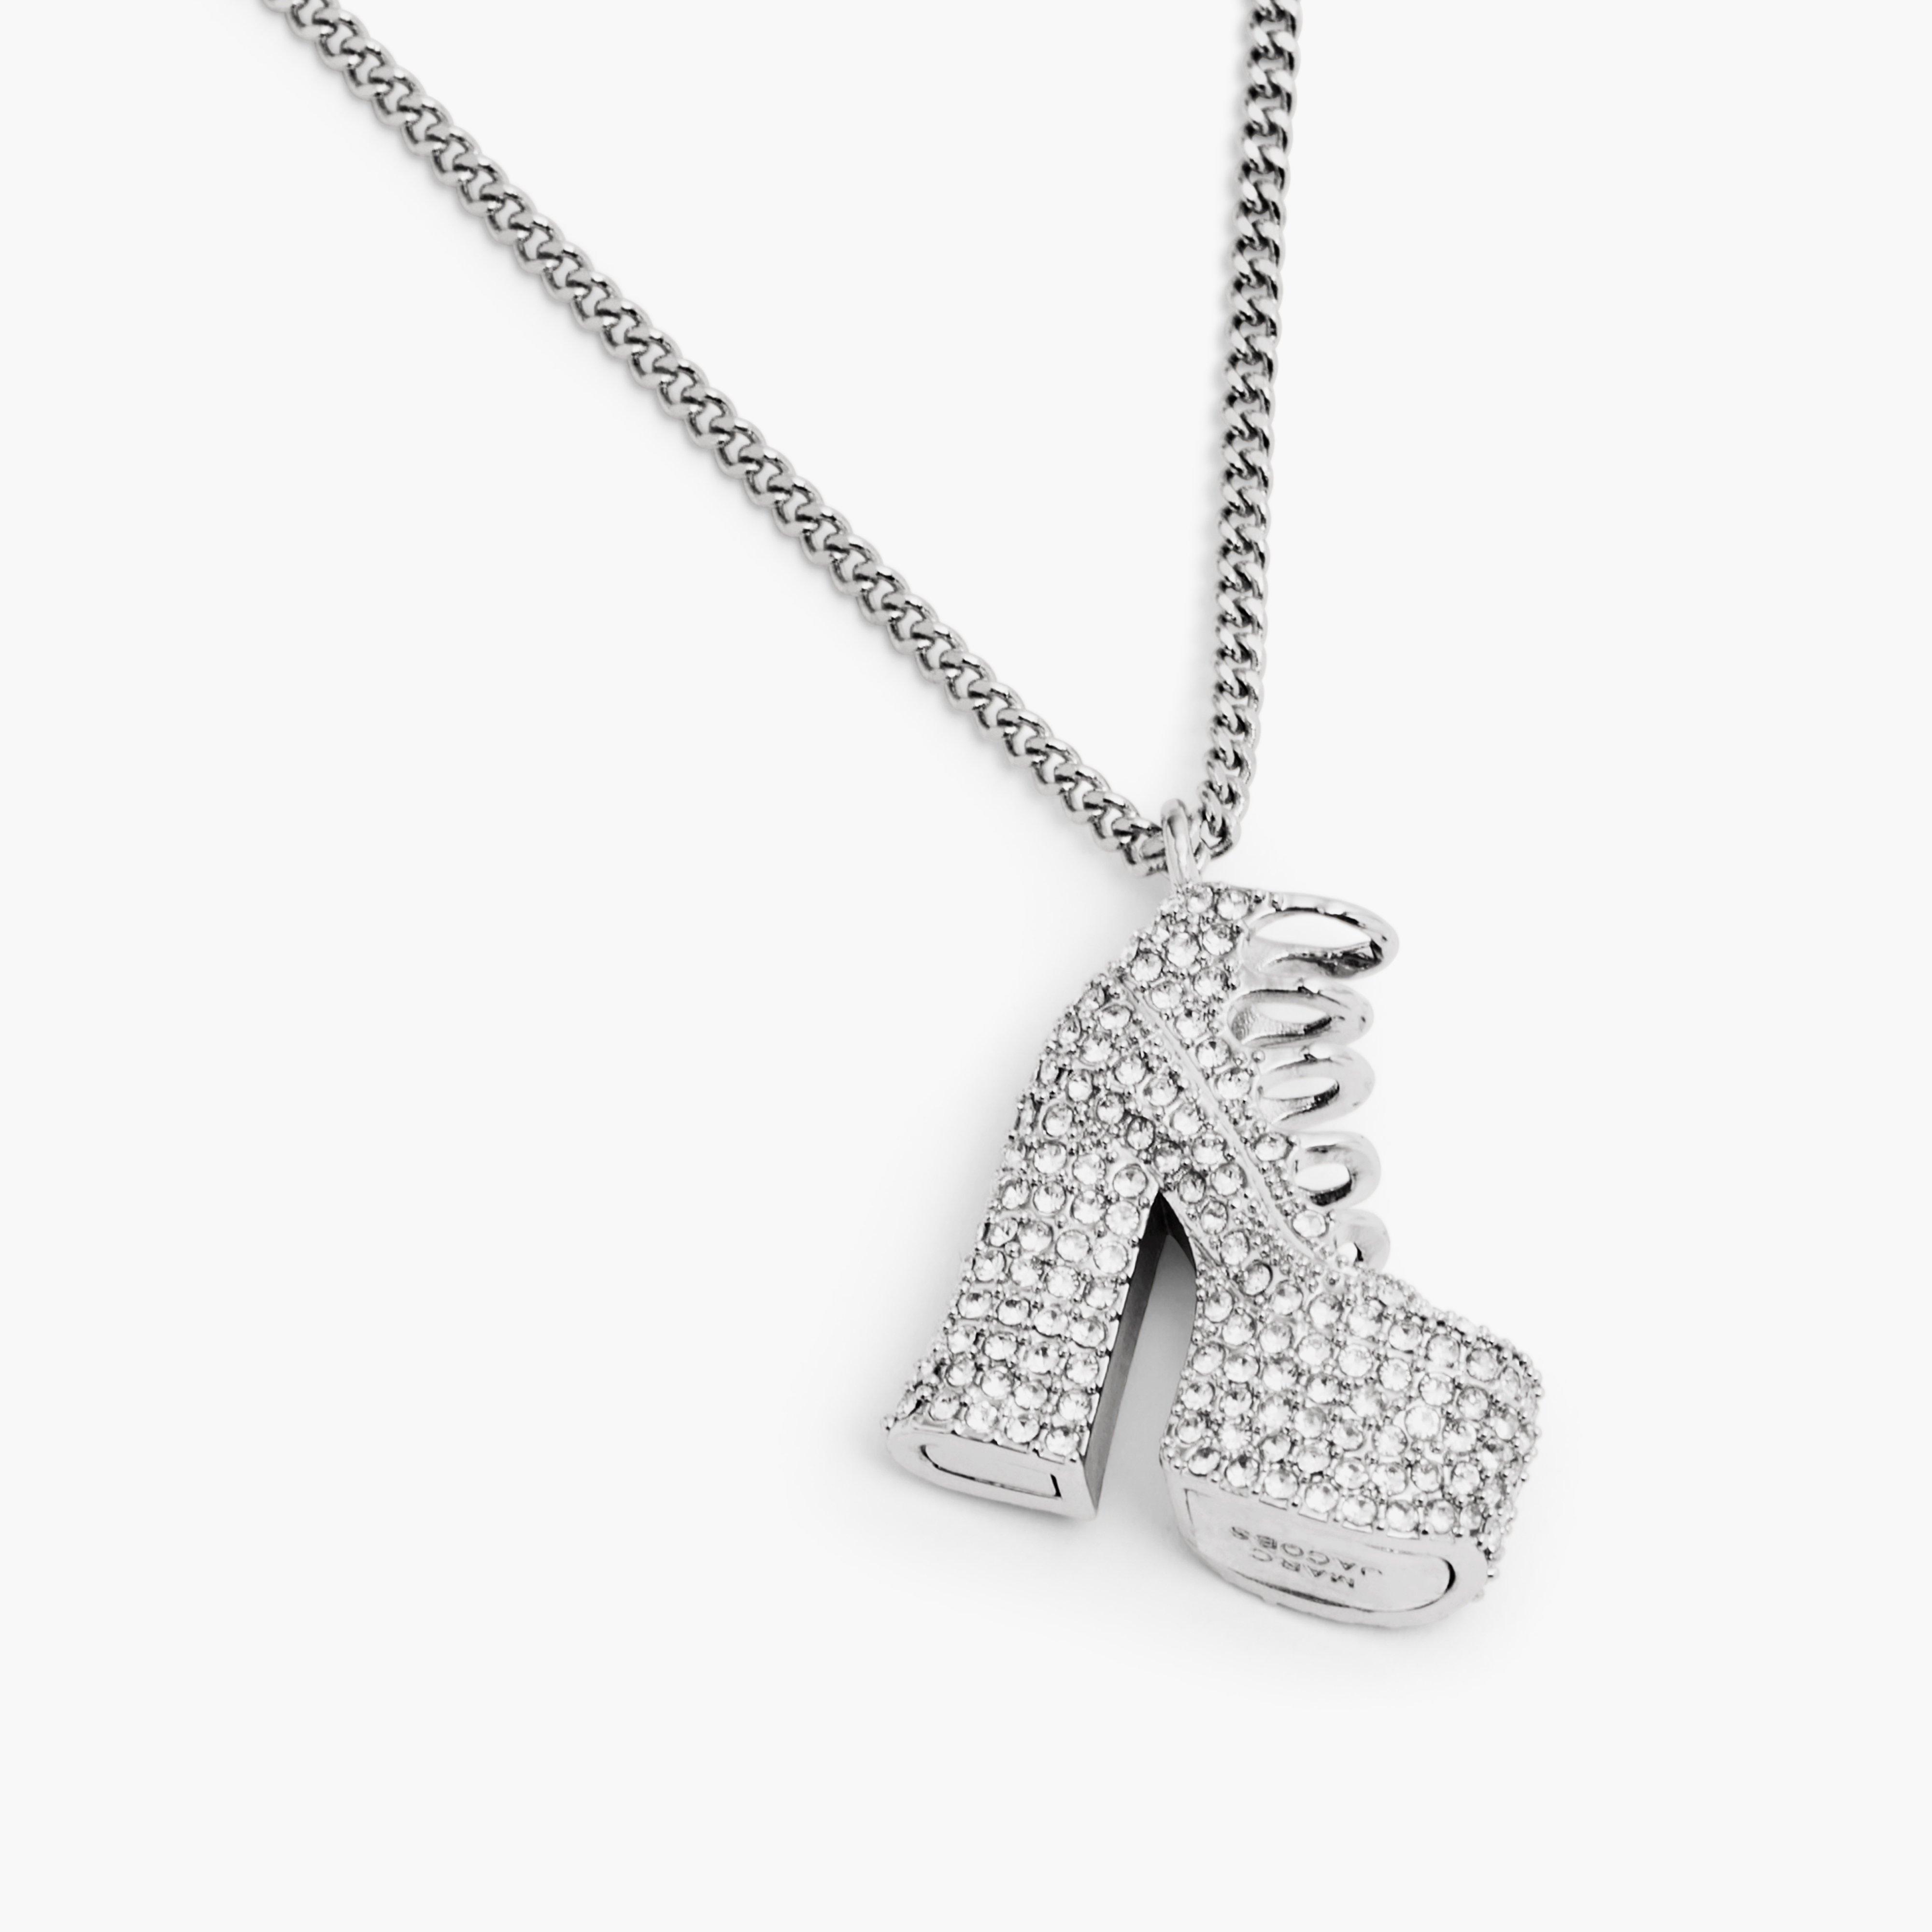 Marc by Marc jacobs The Kiki Ankle Boot Necklace,SILVER/CRYSTAL